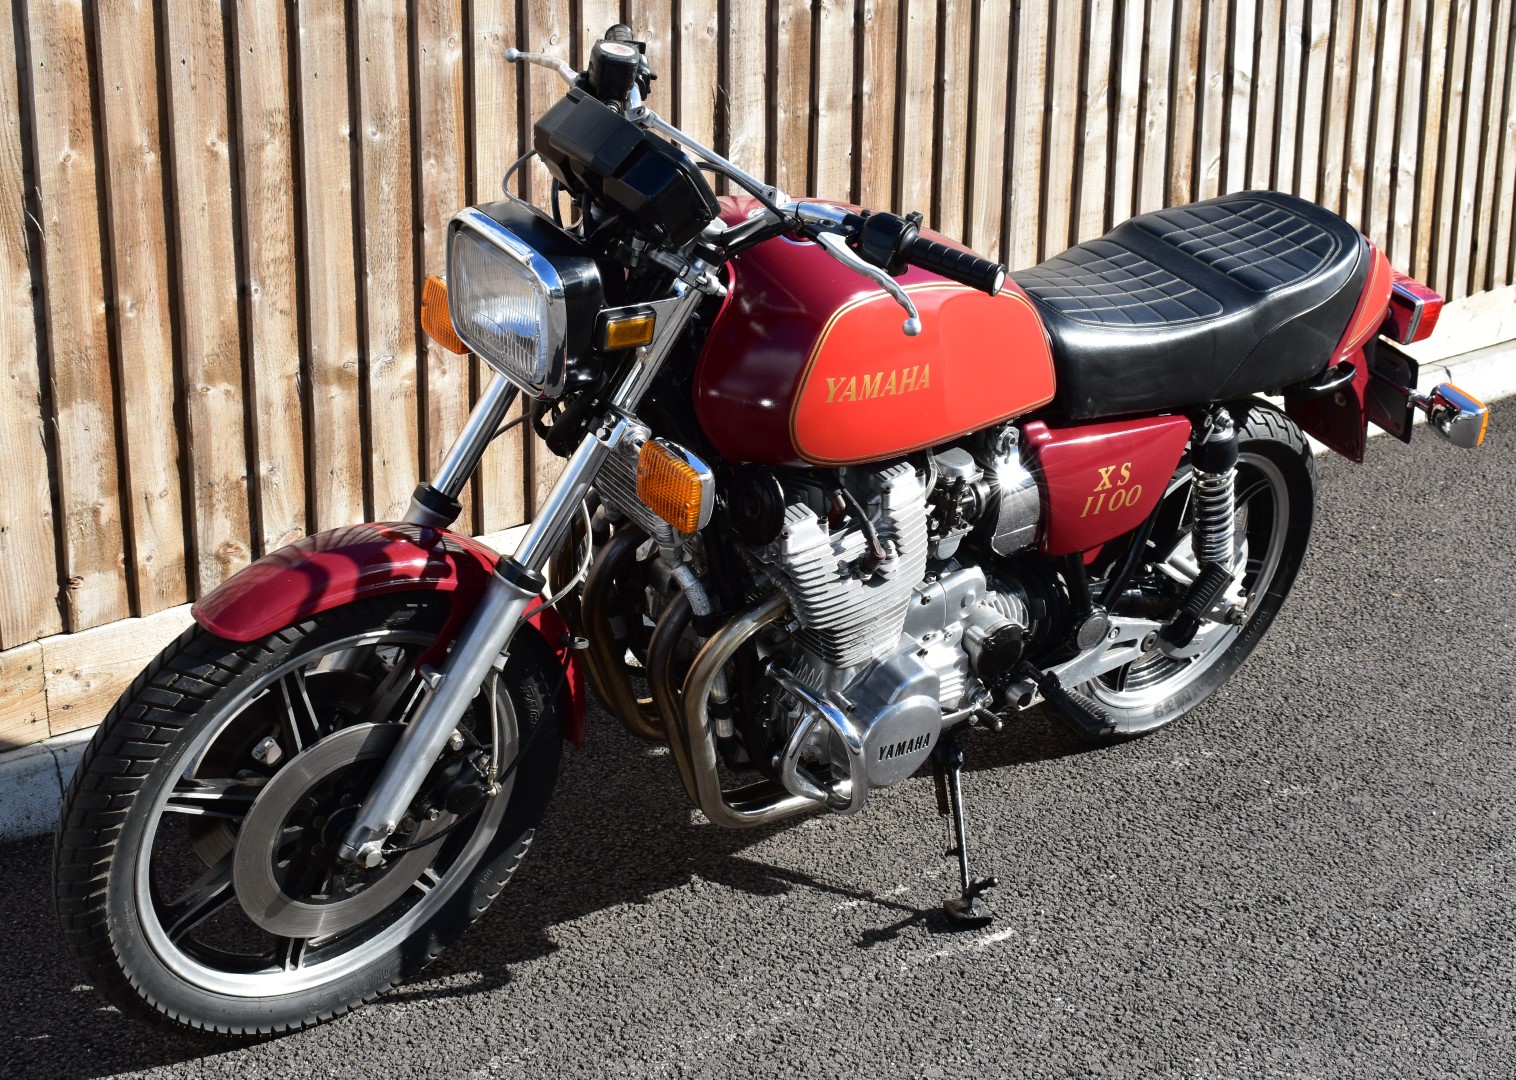 1980 Yamaha XS1100 motorbike registration NGS 439V, with V5c, used by the vendor for continental - Image 7 of 17